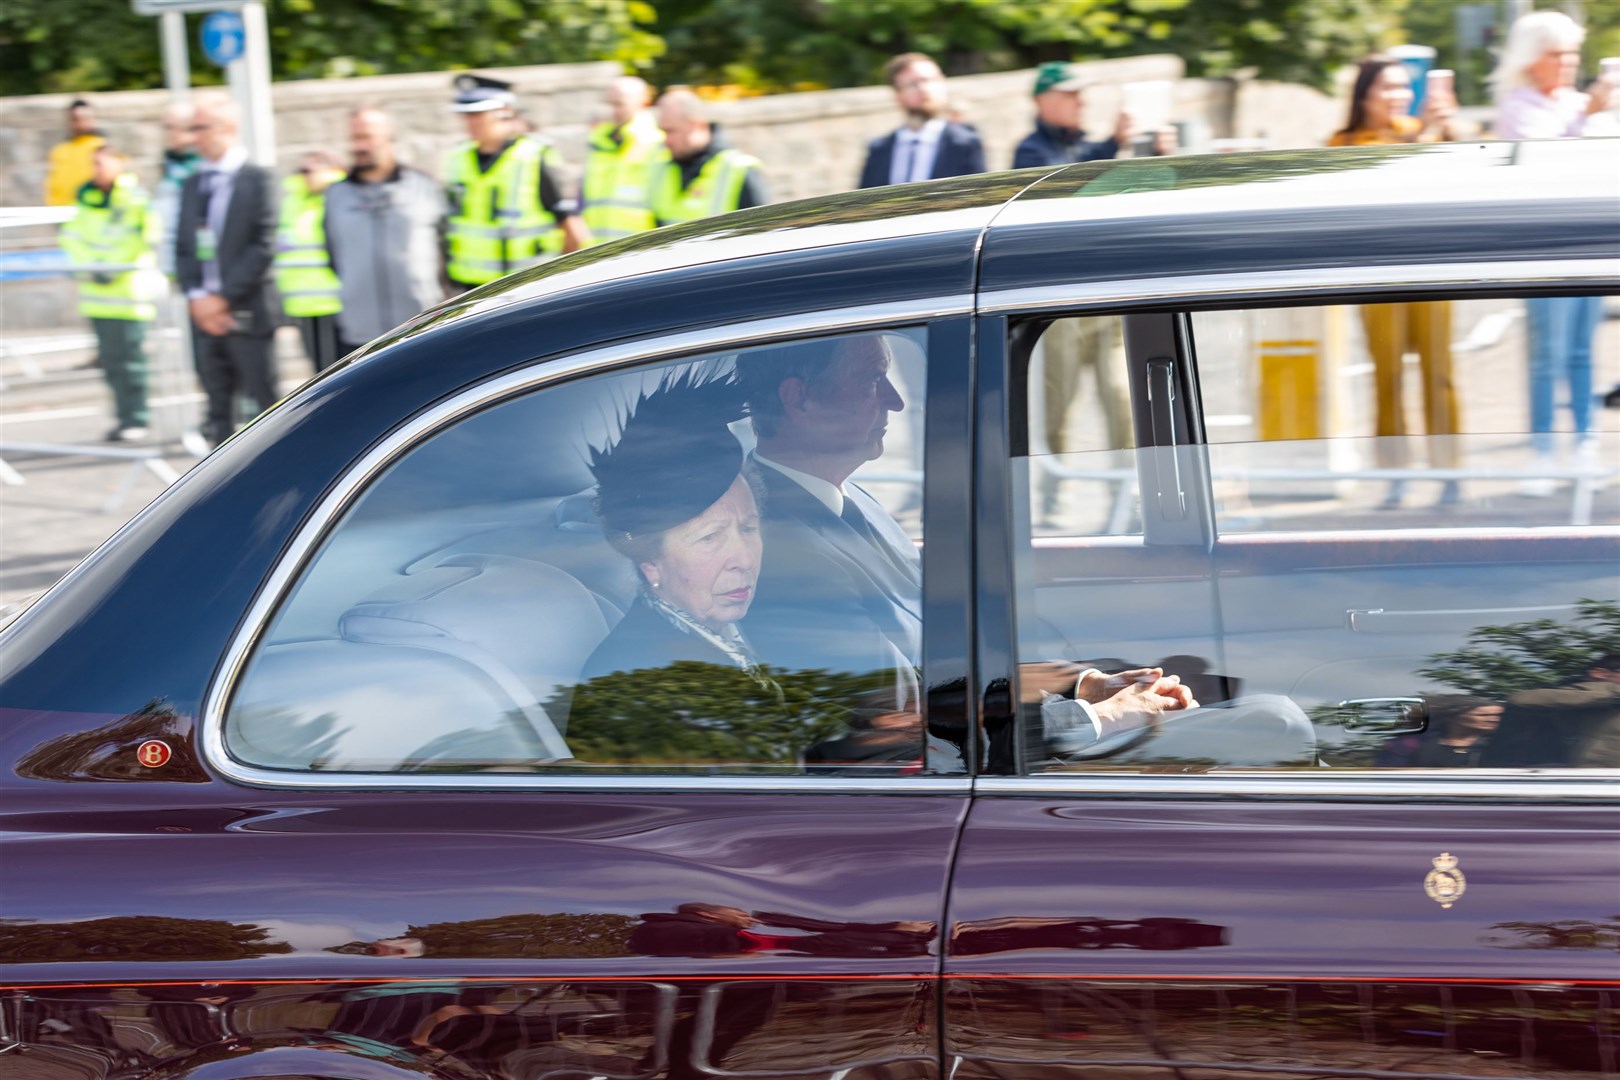 The Princess Royal and her husband Admiral Sir Tim Laurence travelled behind the hearse on its journey to Edinburgh (Paul Campbell/PA)